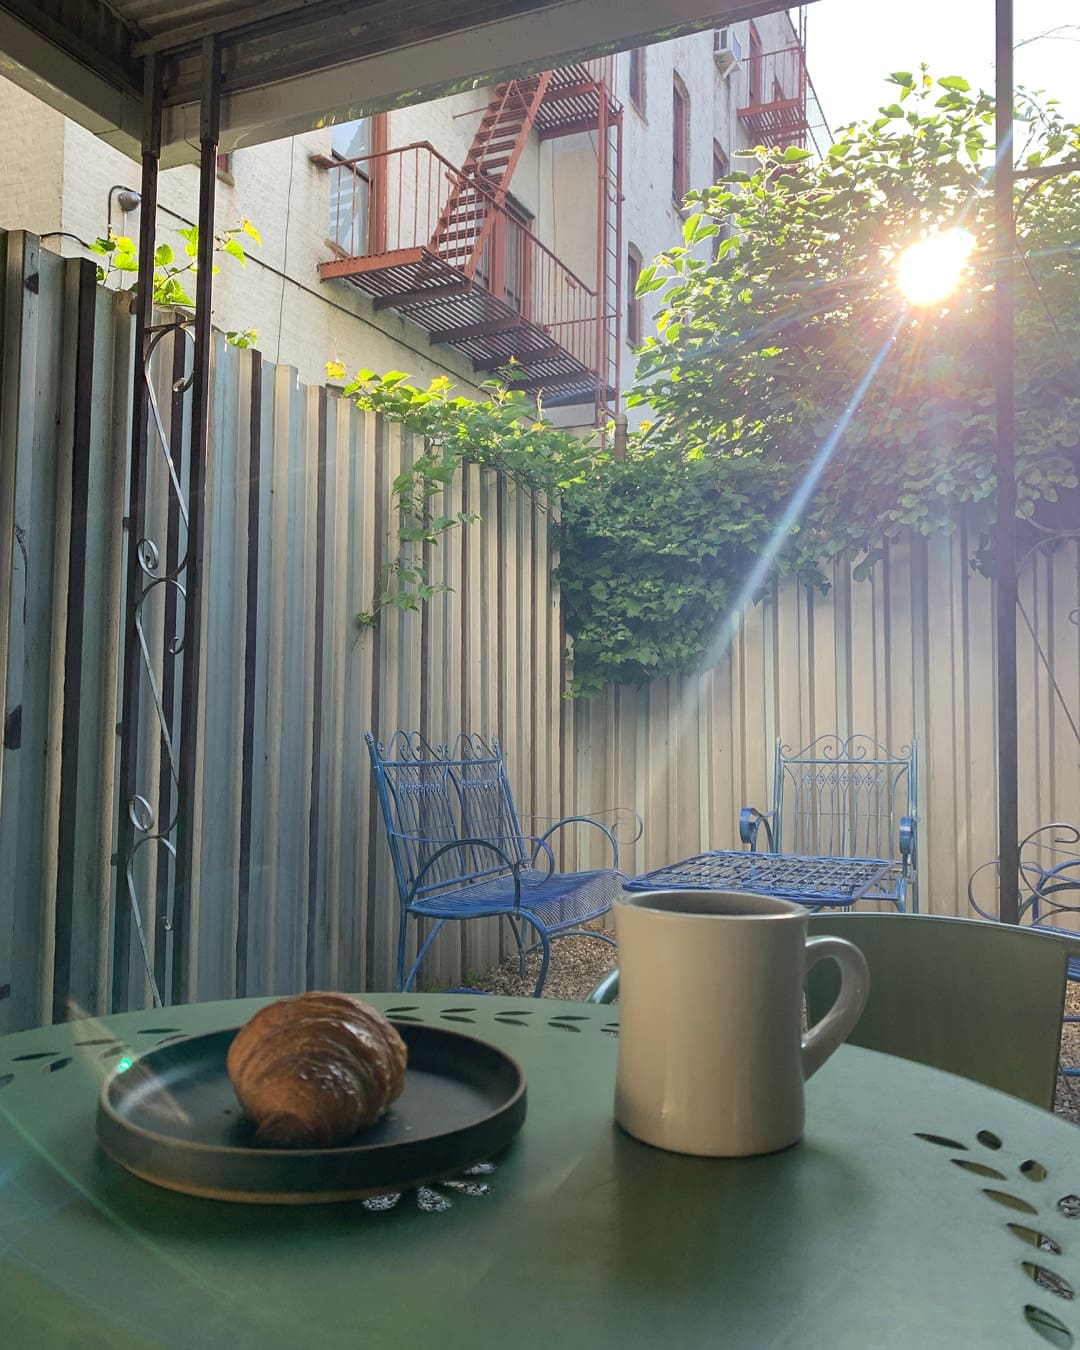 A white mug of coffee next to a croissant on a black plate on a green metal table under a shelter in the outdoor terrace area of Hamlet Coffee Company in New York.